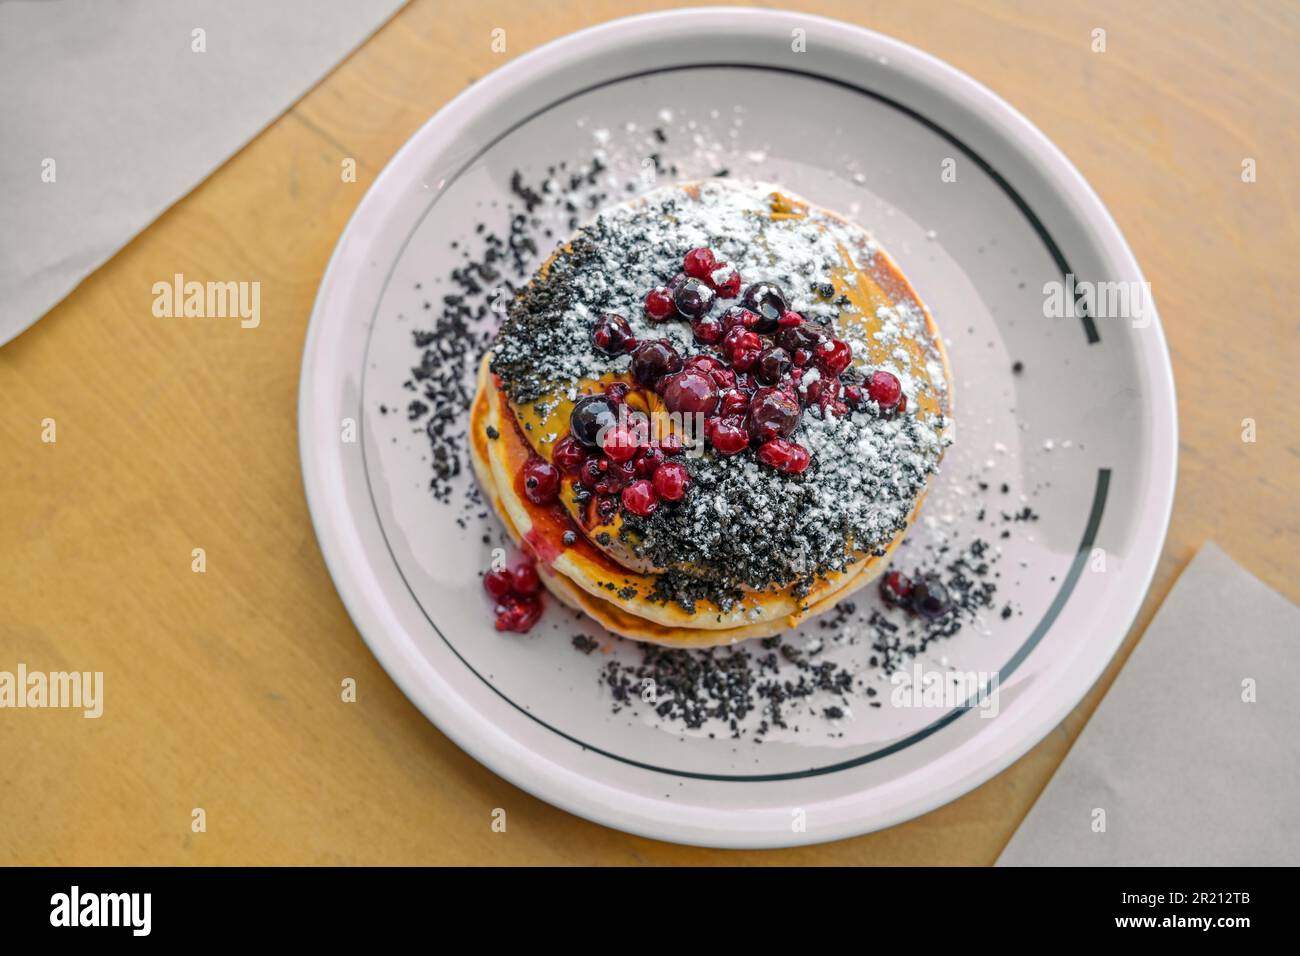 Pancakes with peanut butter cream, berries, crumble and icing sugar on a plate and a wooden table, sweet brunch or dessert dish, top view from above, Stock Photo